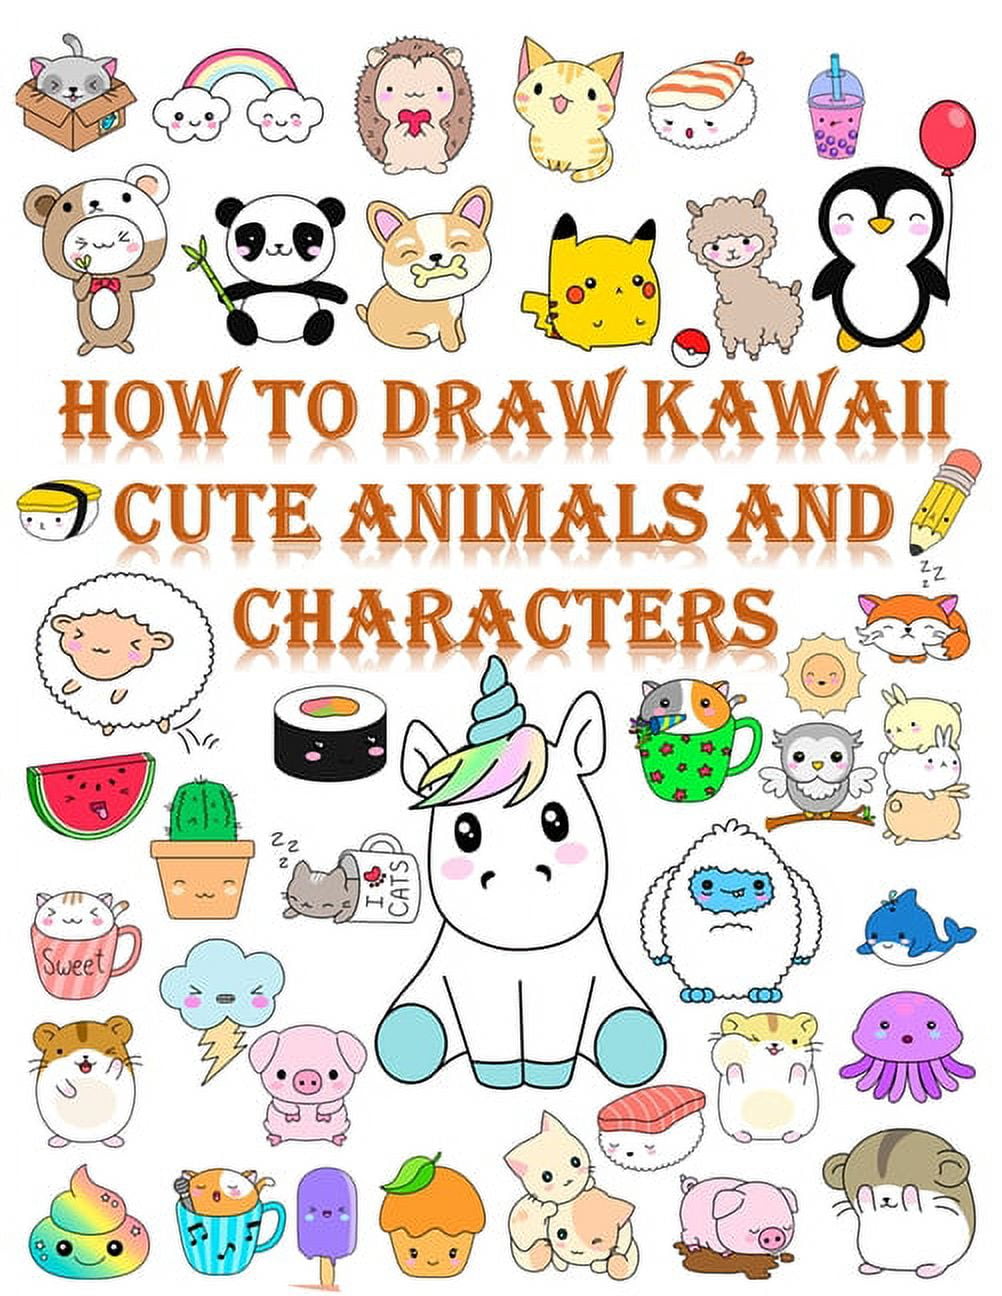 Drawing Chibi Characters: How to Draw Kawaii Food, Animals, People and Cute  Chibi Stuff - Step By Step Drawing Guide Book For Kids and Beginner:  Corner, Practice: 9798767023356: Amazon.com: Books